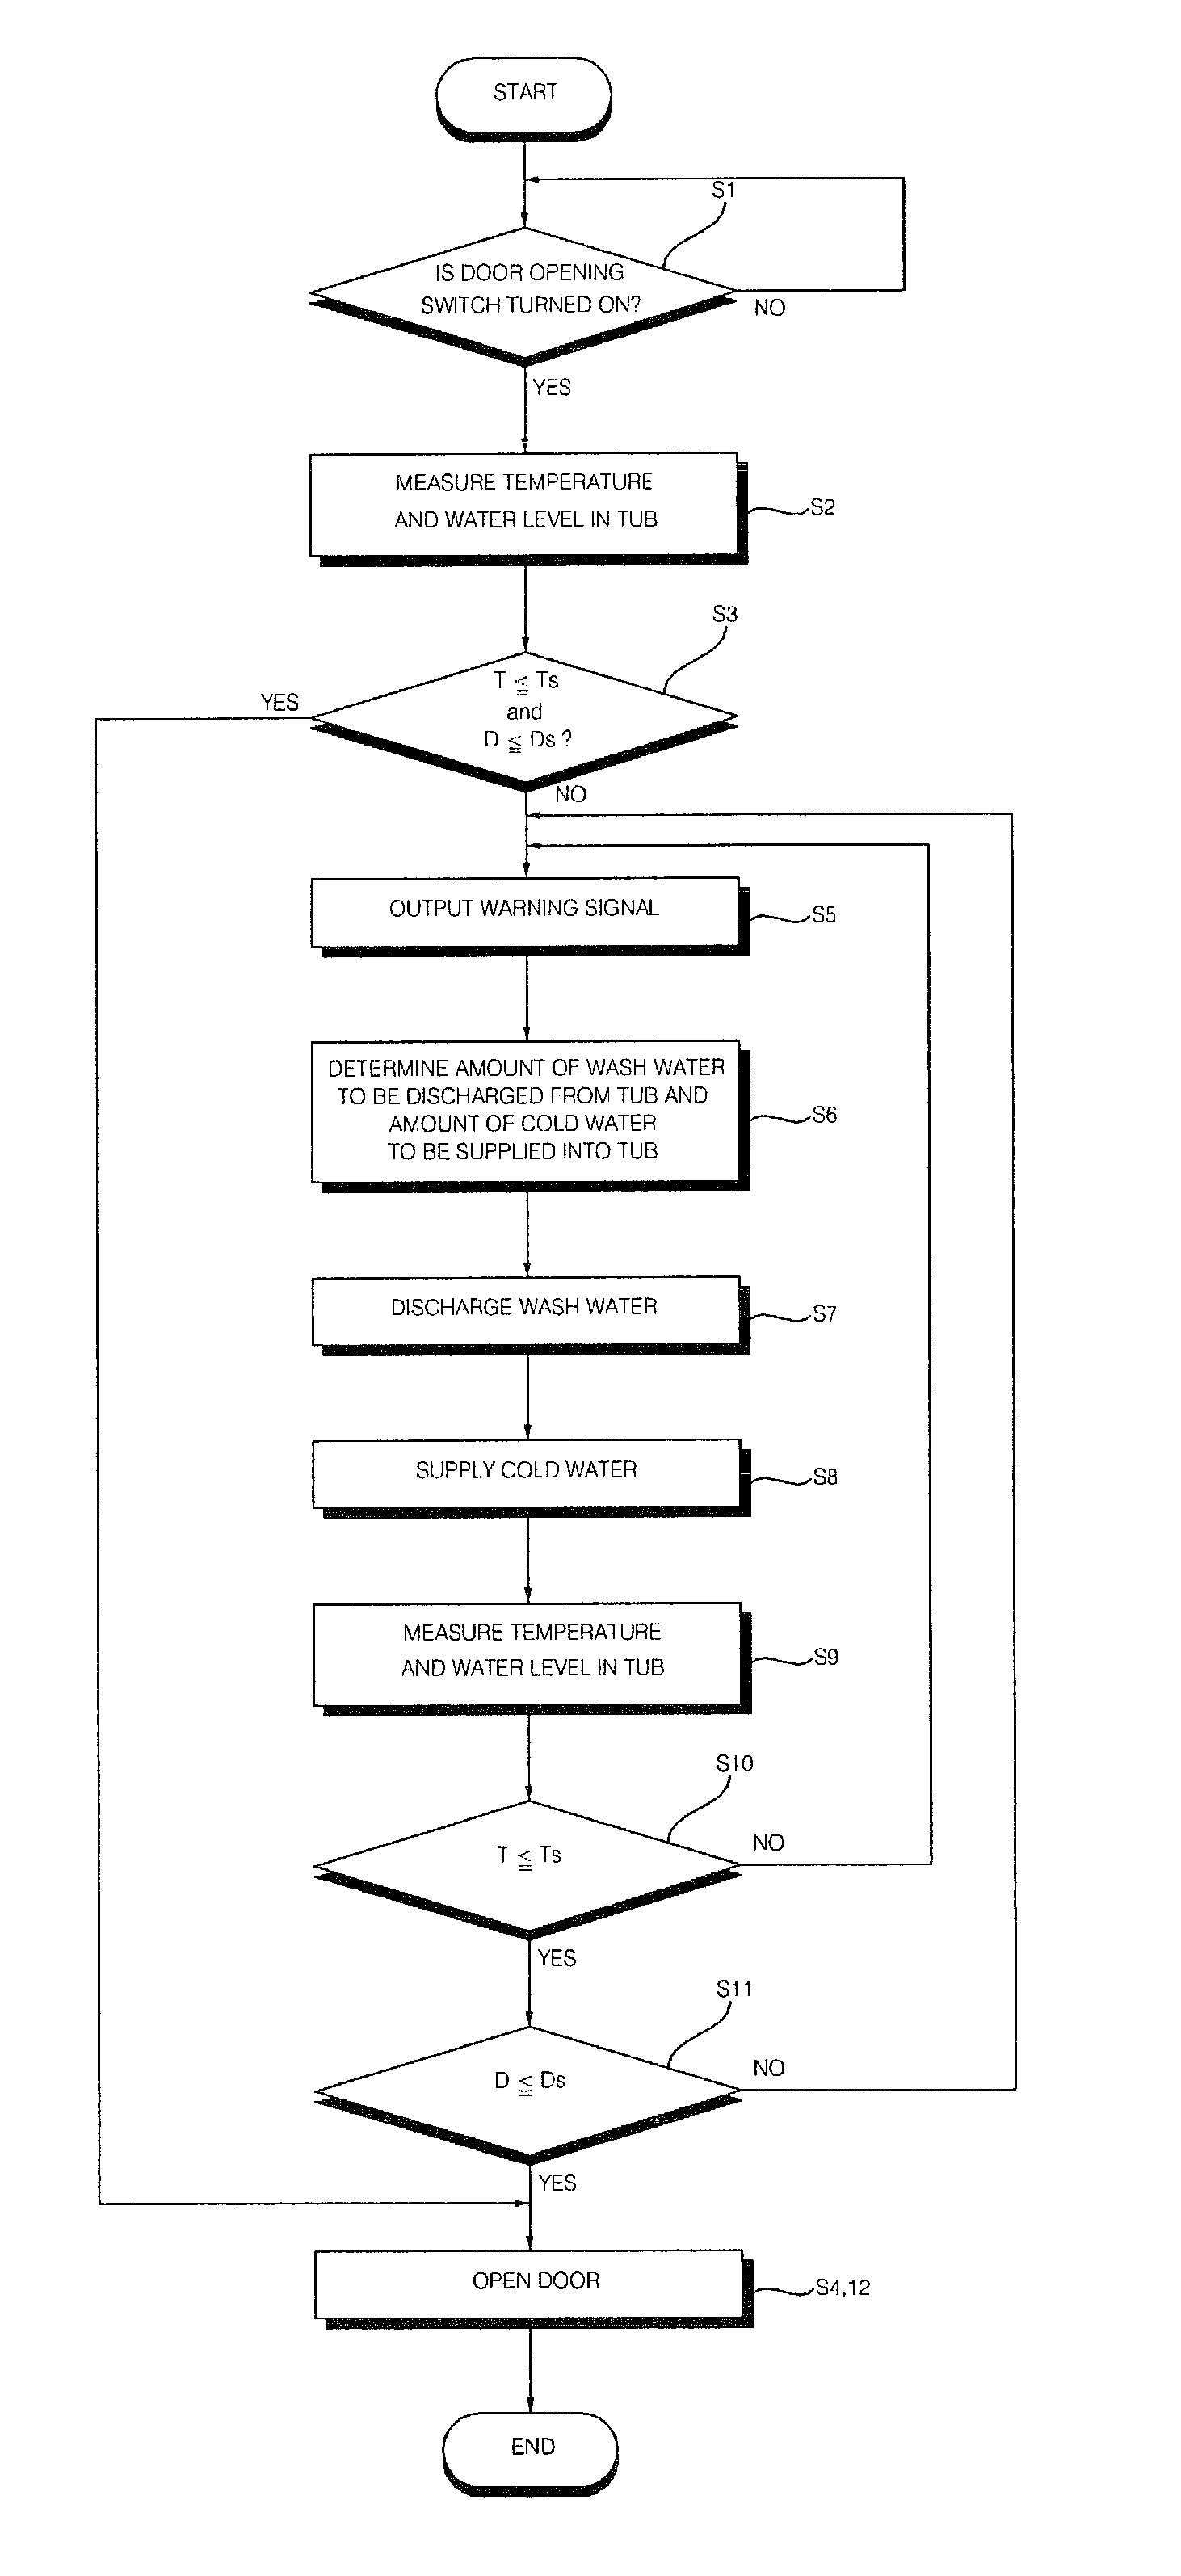 Method of controlling the opening of door of laundry treatment machine